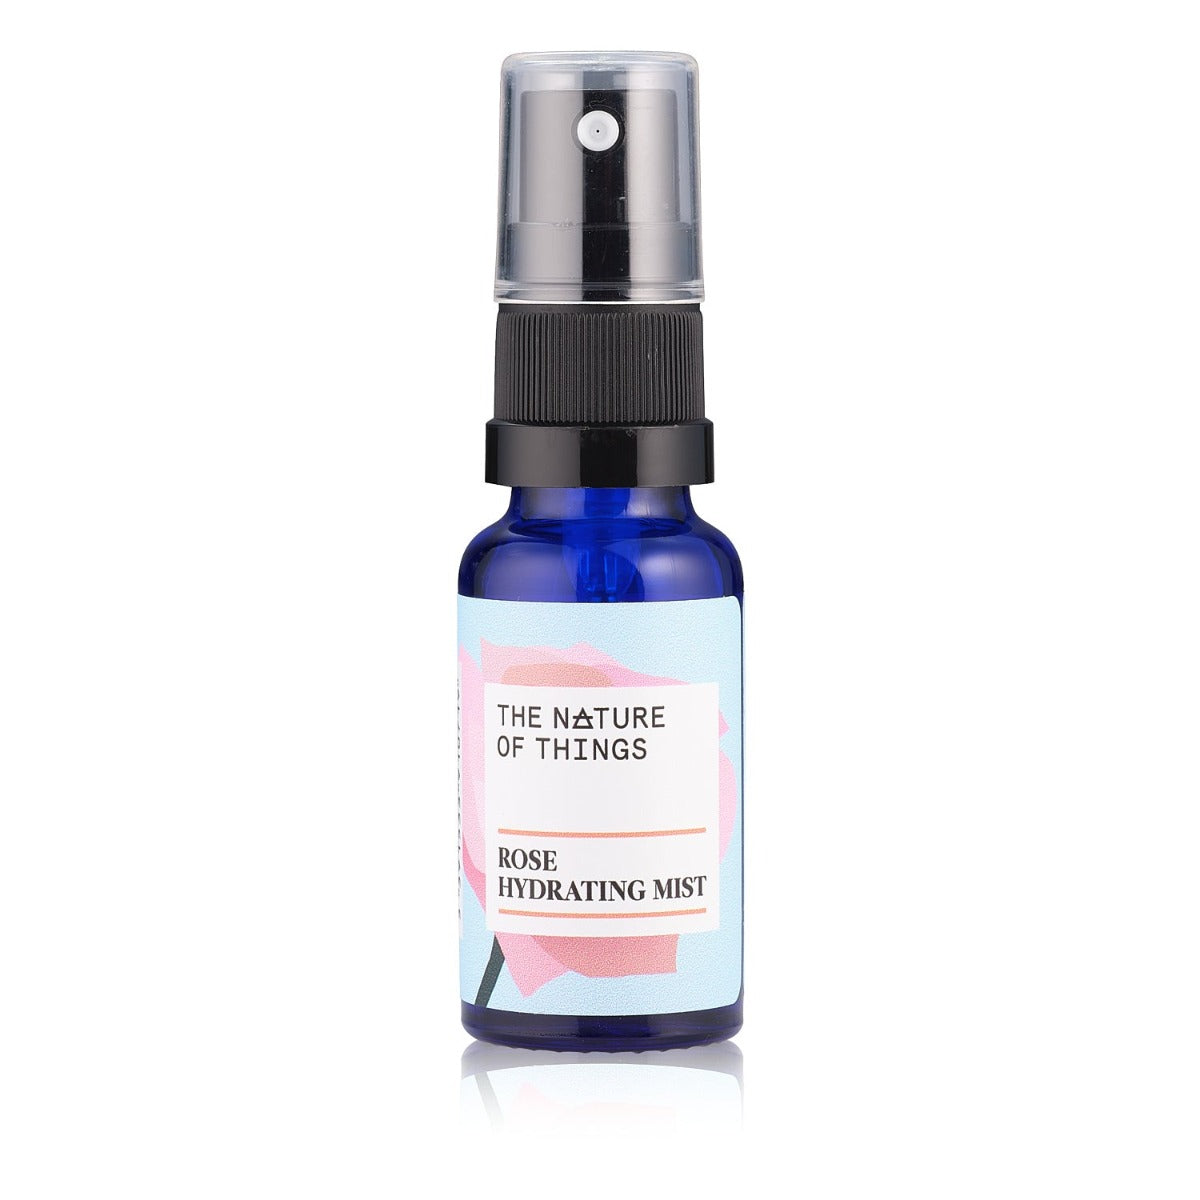 Rose Hydrating Mist from The Nature of Things